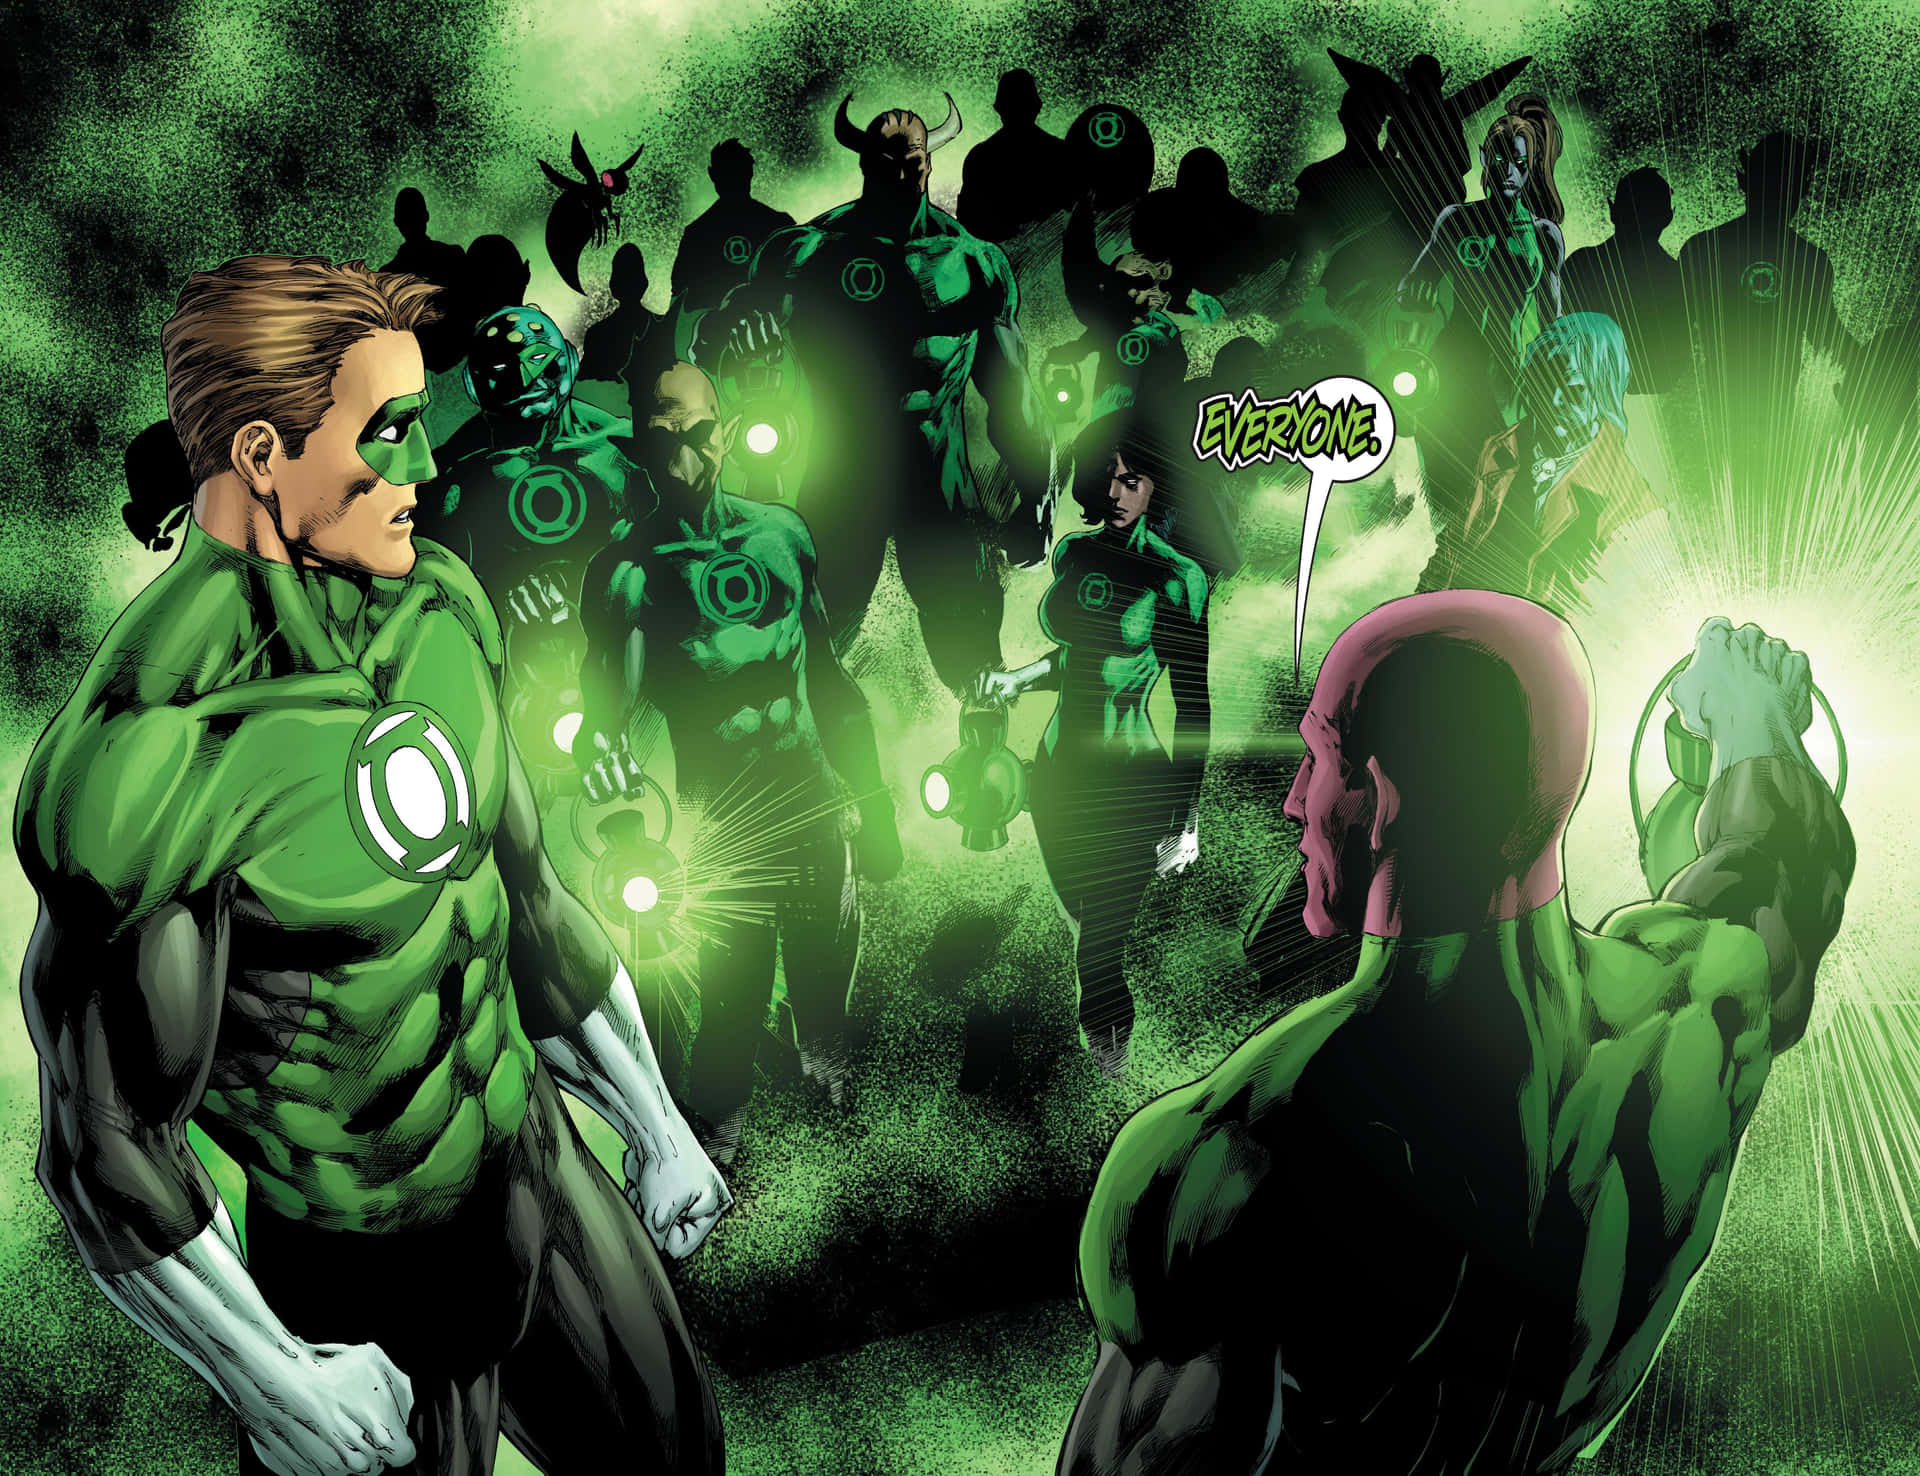 “Embrace your inner power with the Green Lantern”